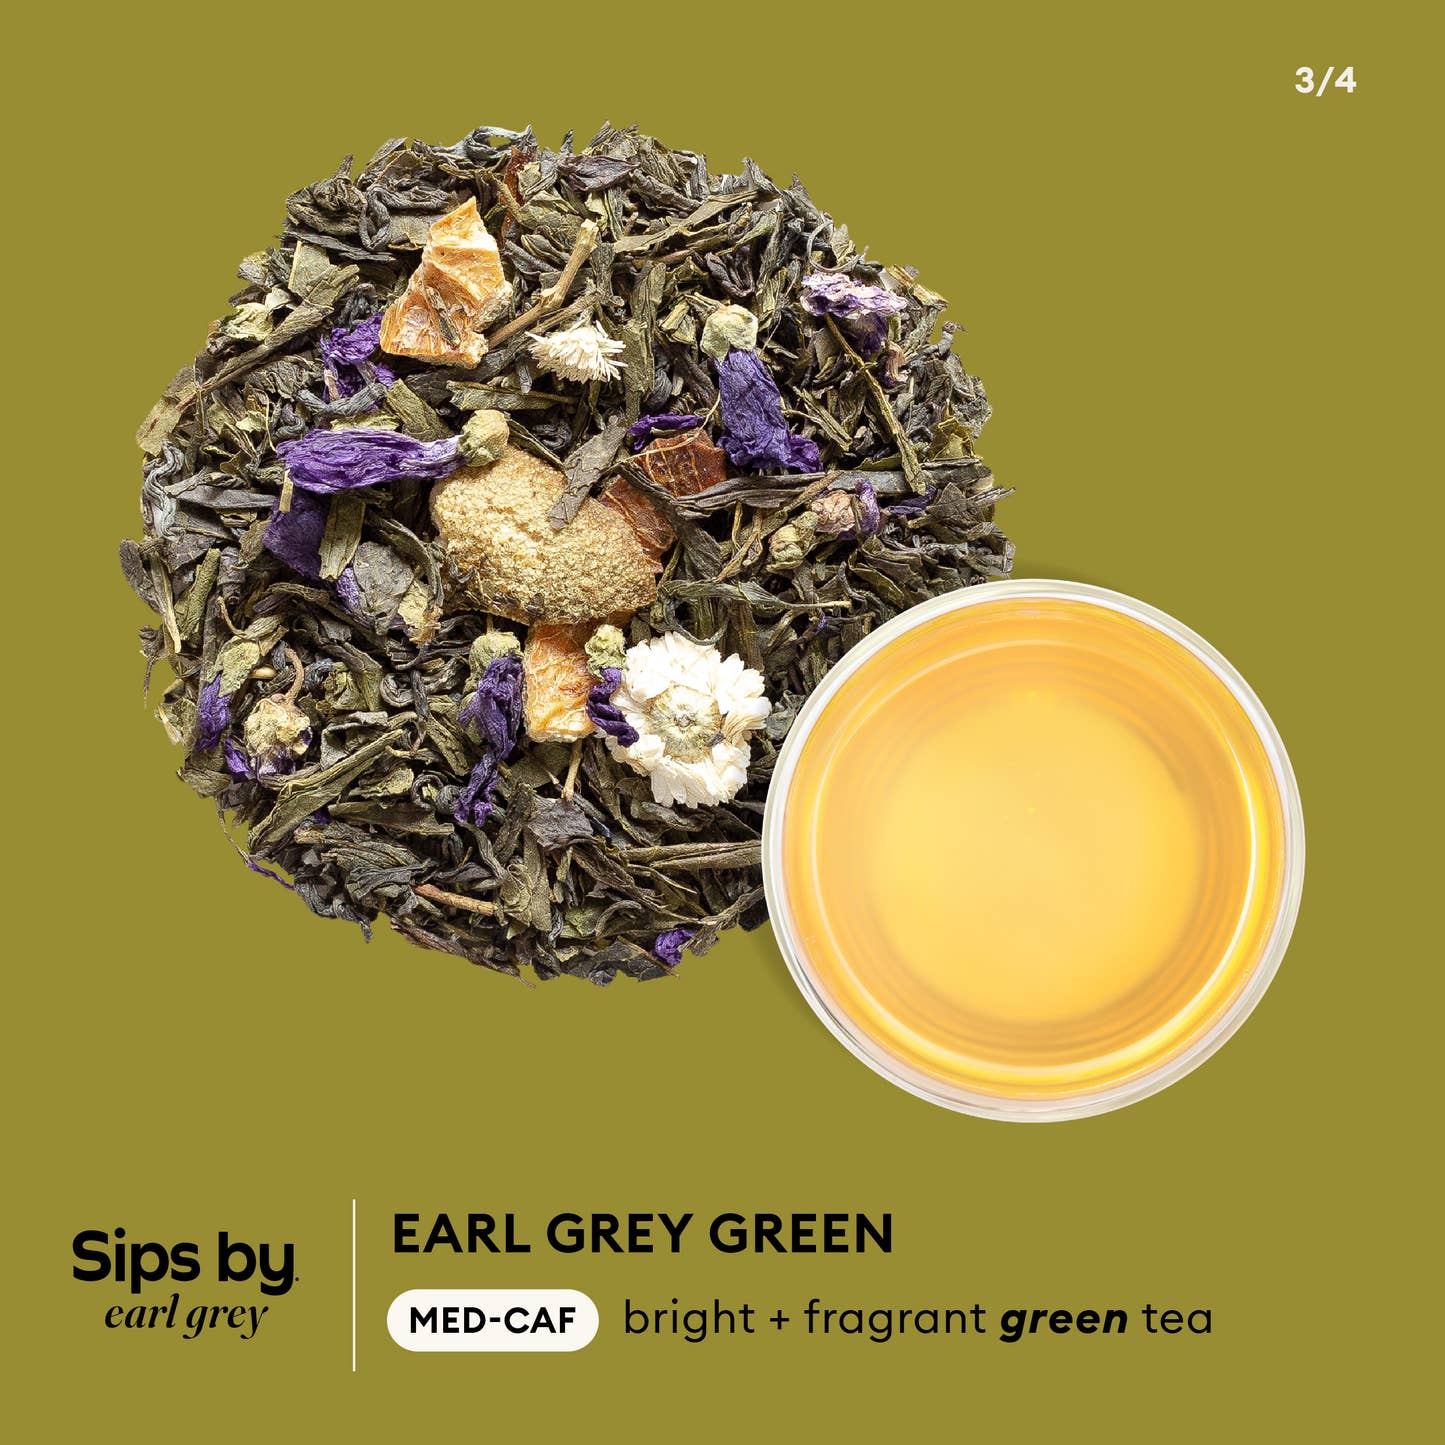 Sips by Earl Grey - Green Earl Grey med-caf, bright + fragrant infographic